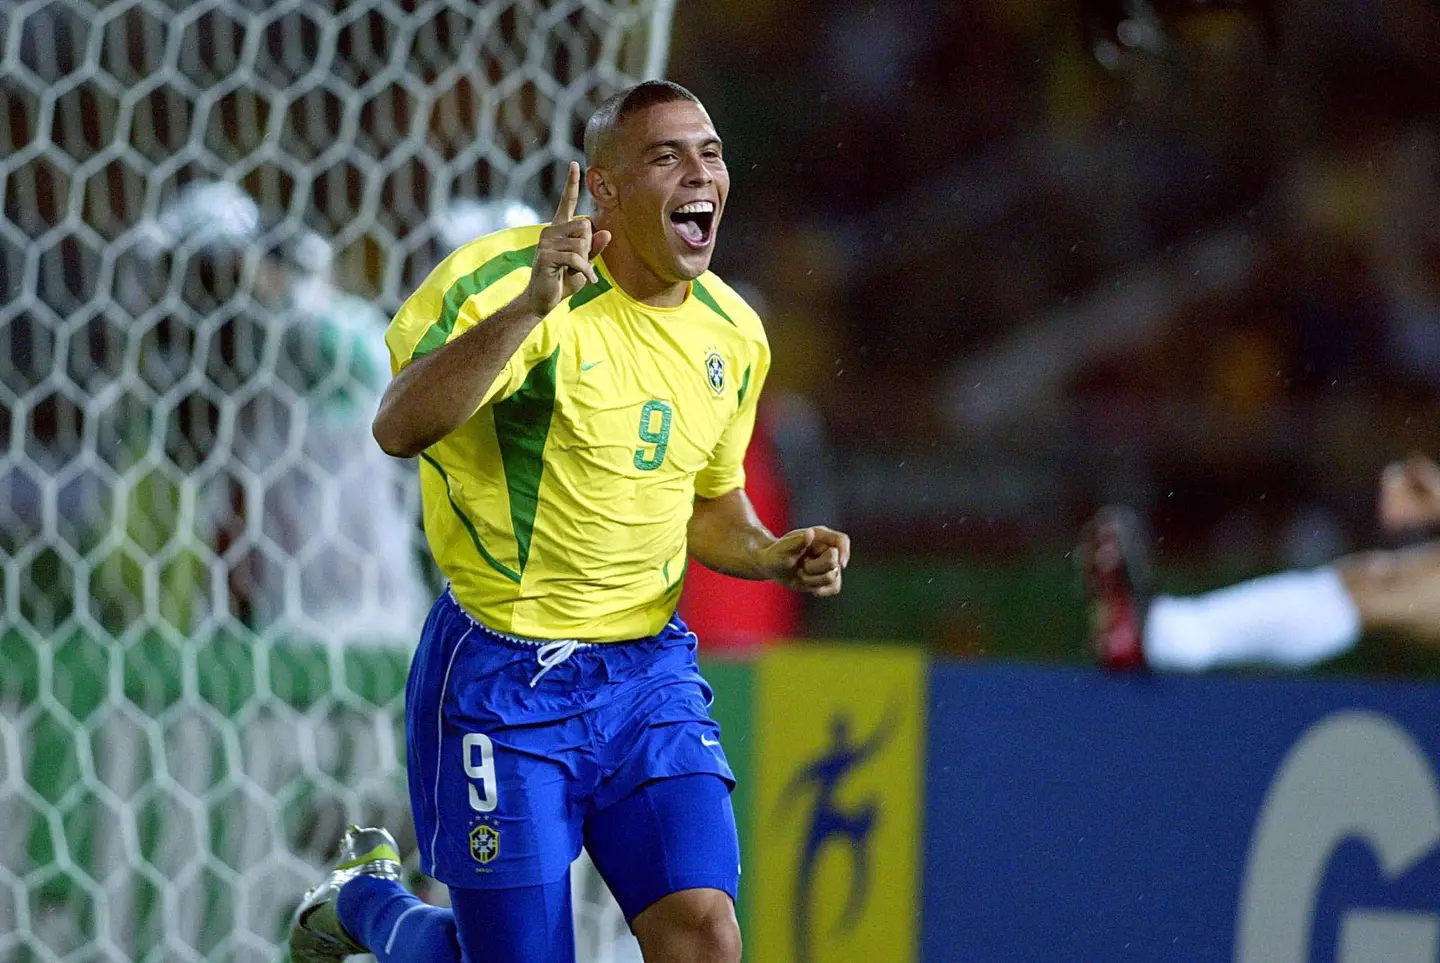 Ronaldo celebrates after scoring for Brazil in the World Cup final. Image: Alamy 